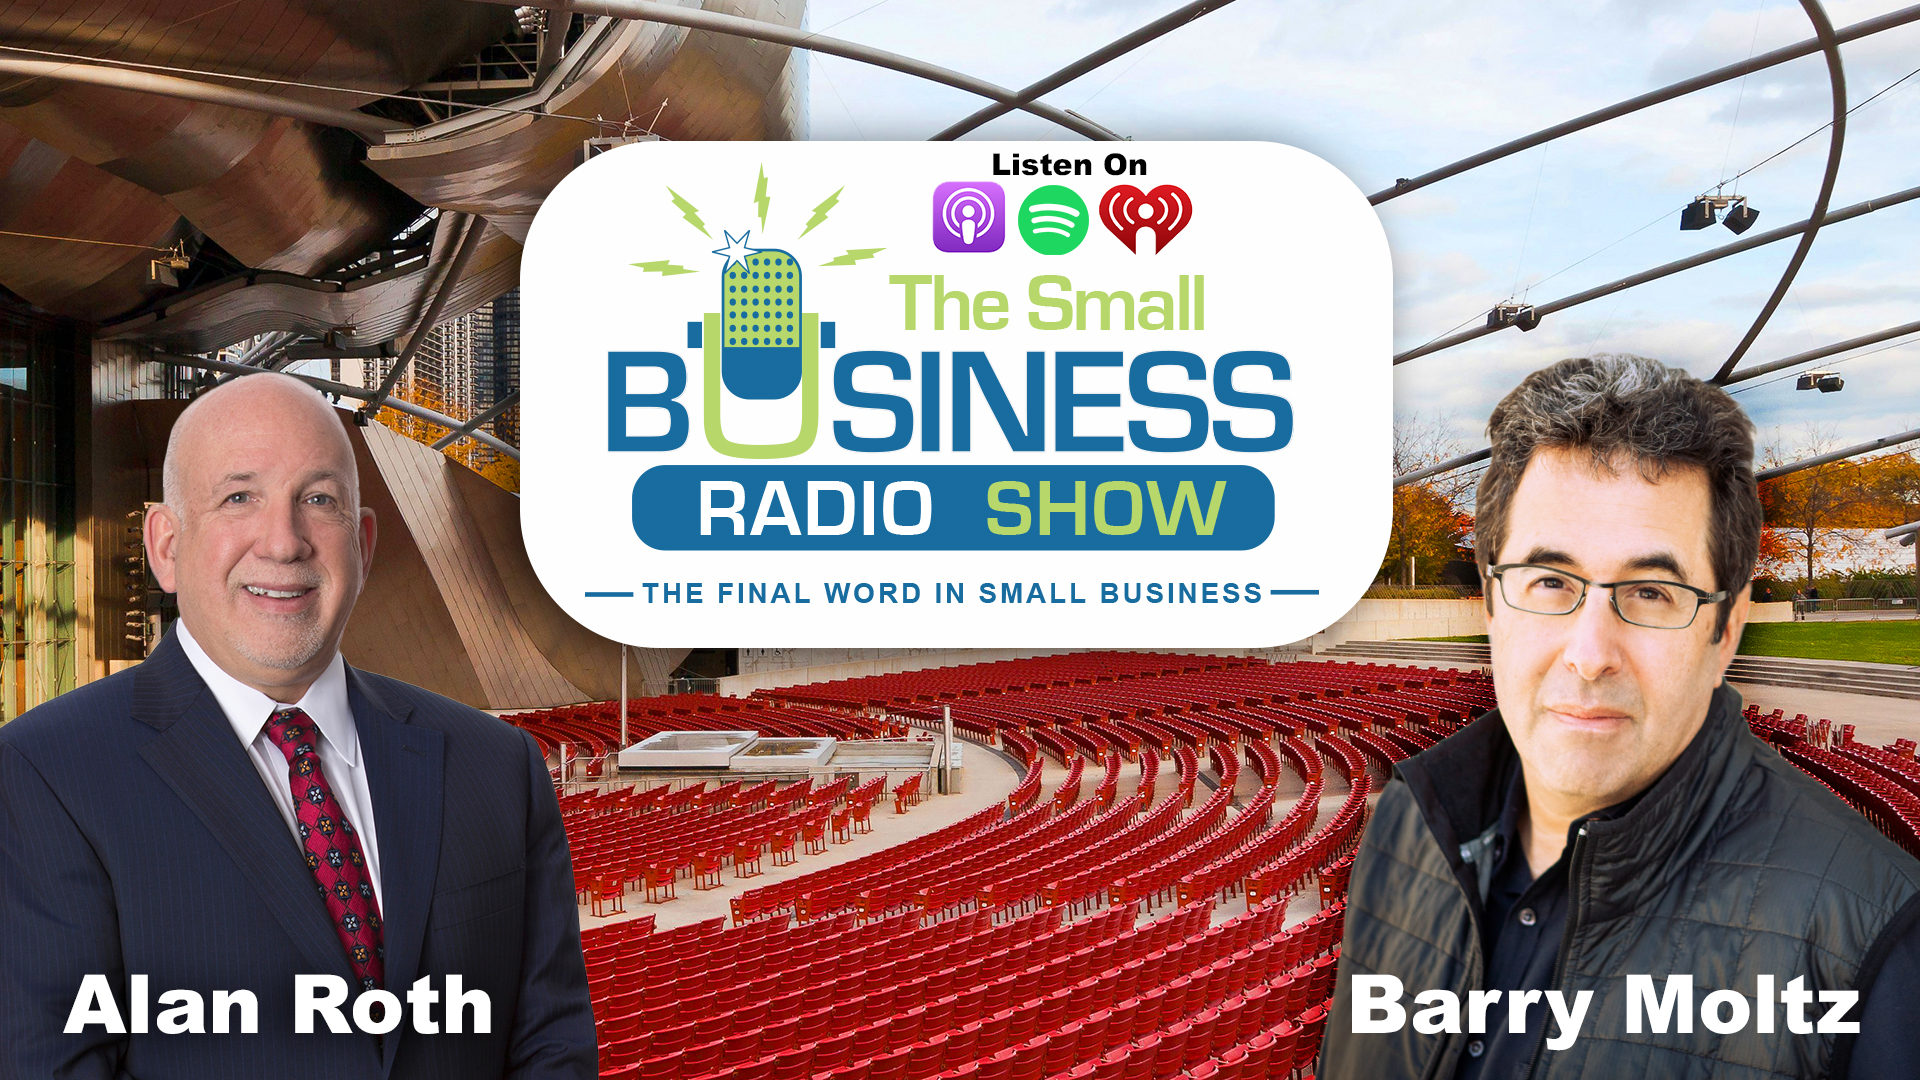 Alan Roth on The Small Business Radio Show SBIC